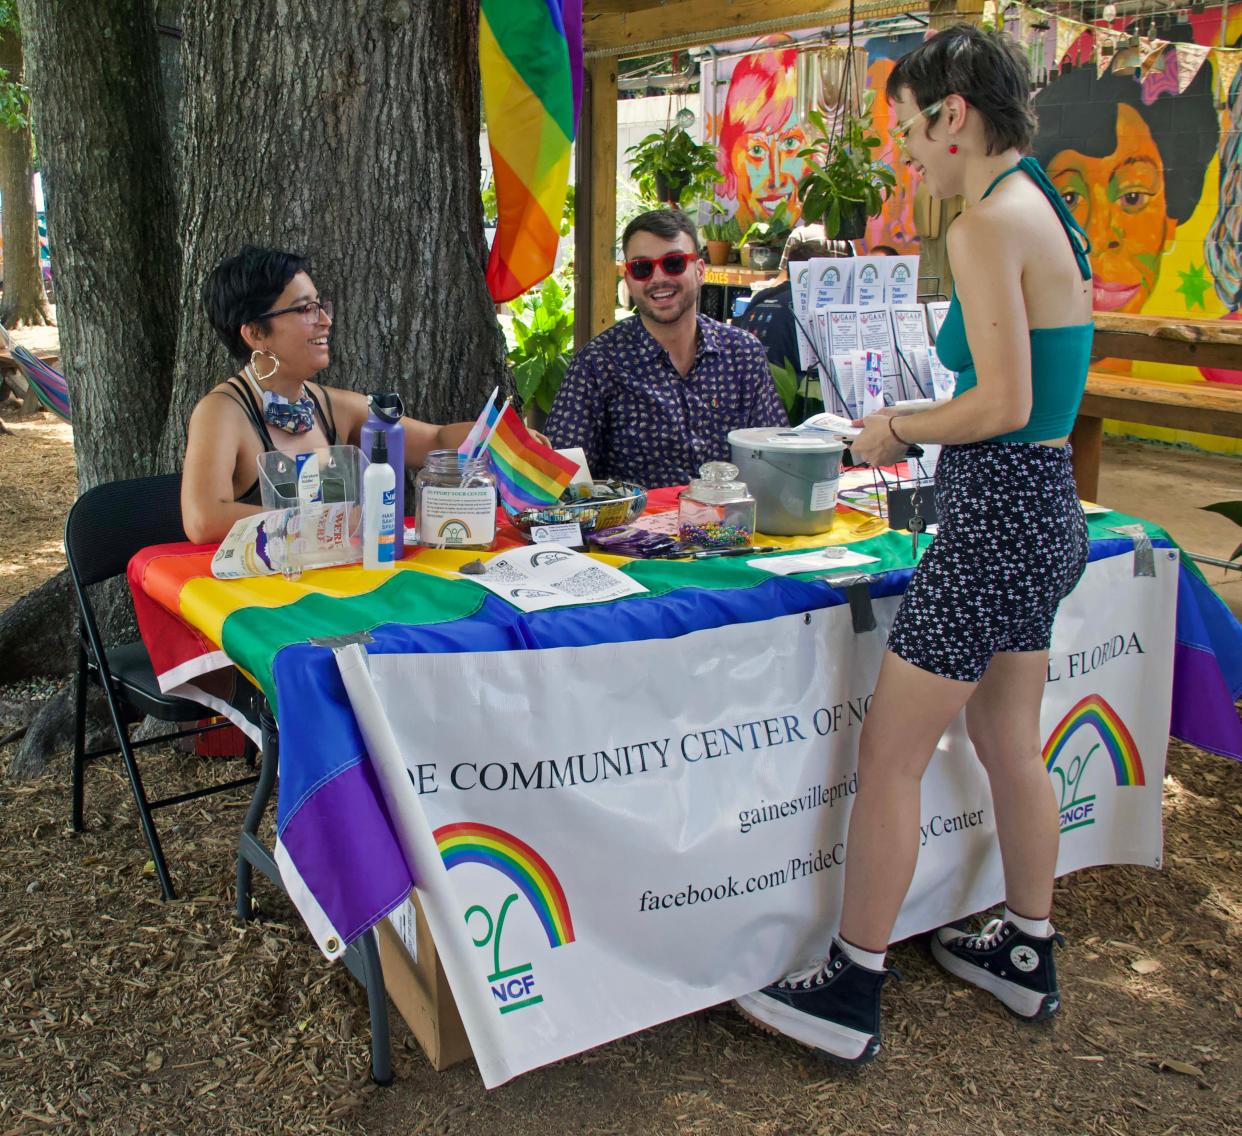 Shiala Narago, left, and Ike Reichenbach, middle, volunteers with the Pride Community Center of North Central Florida, talk with Hayla Corzine, right, about the next Queer Maker's Market while at the 4th Ave Food Park in Gainesville on Saturday. The next Queer Maker’s Market will be held at Heartwood Soundstage on June 26, and will be co-sponsored by the Pride Community Center of North Central Florida. “Pride Center will be expanding our open hours later this summer, and we invite everybody to the pride festival on Oct. 22,” said Faith Reidenbach, the center's volunteer coordinator.